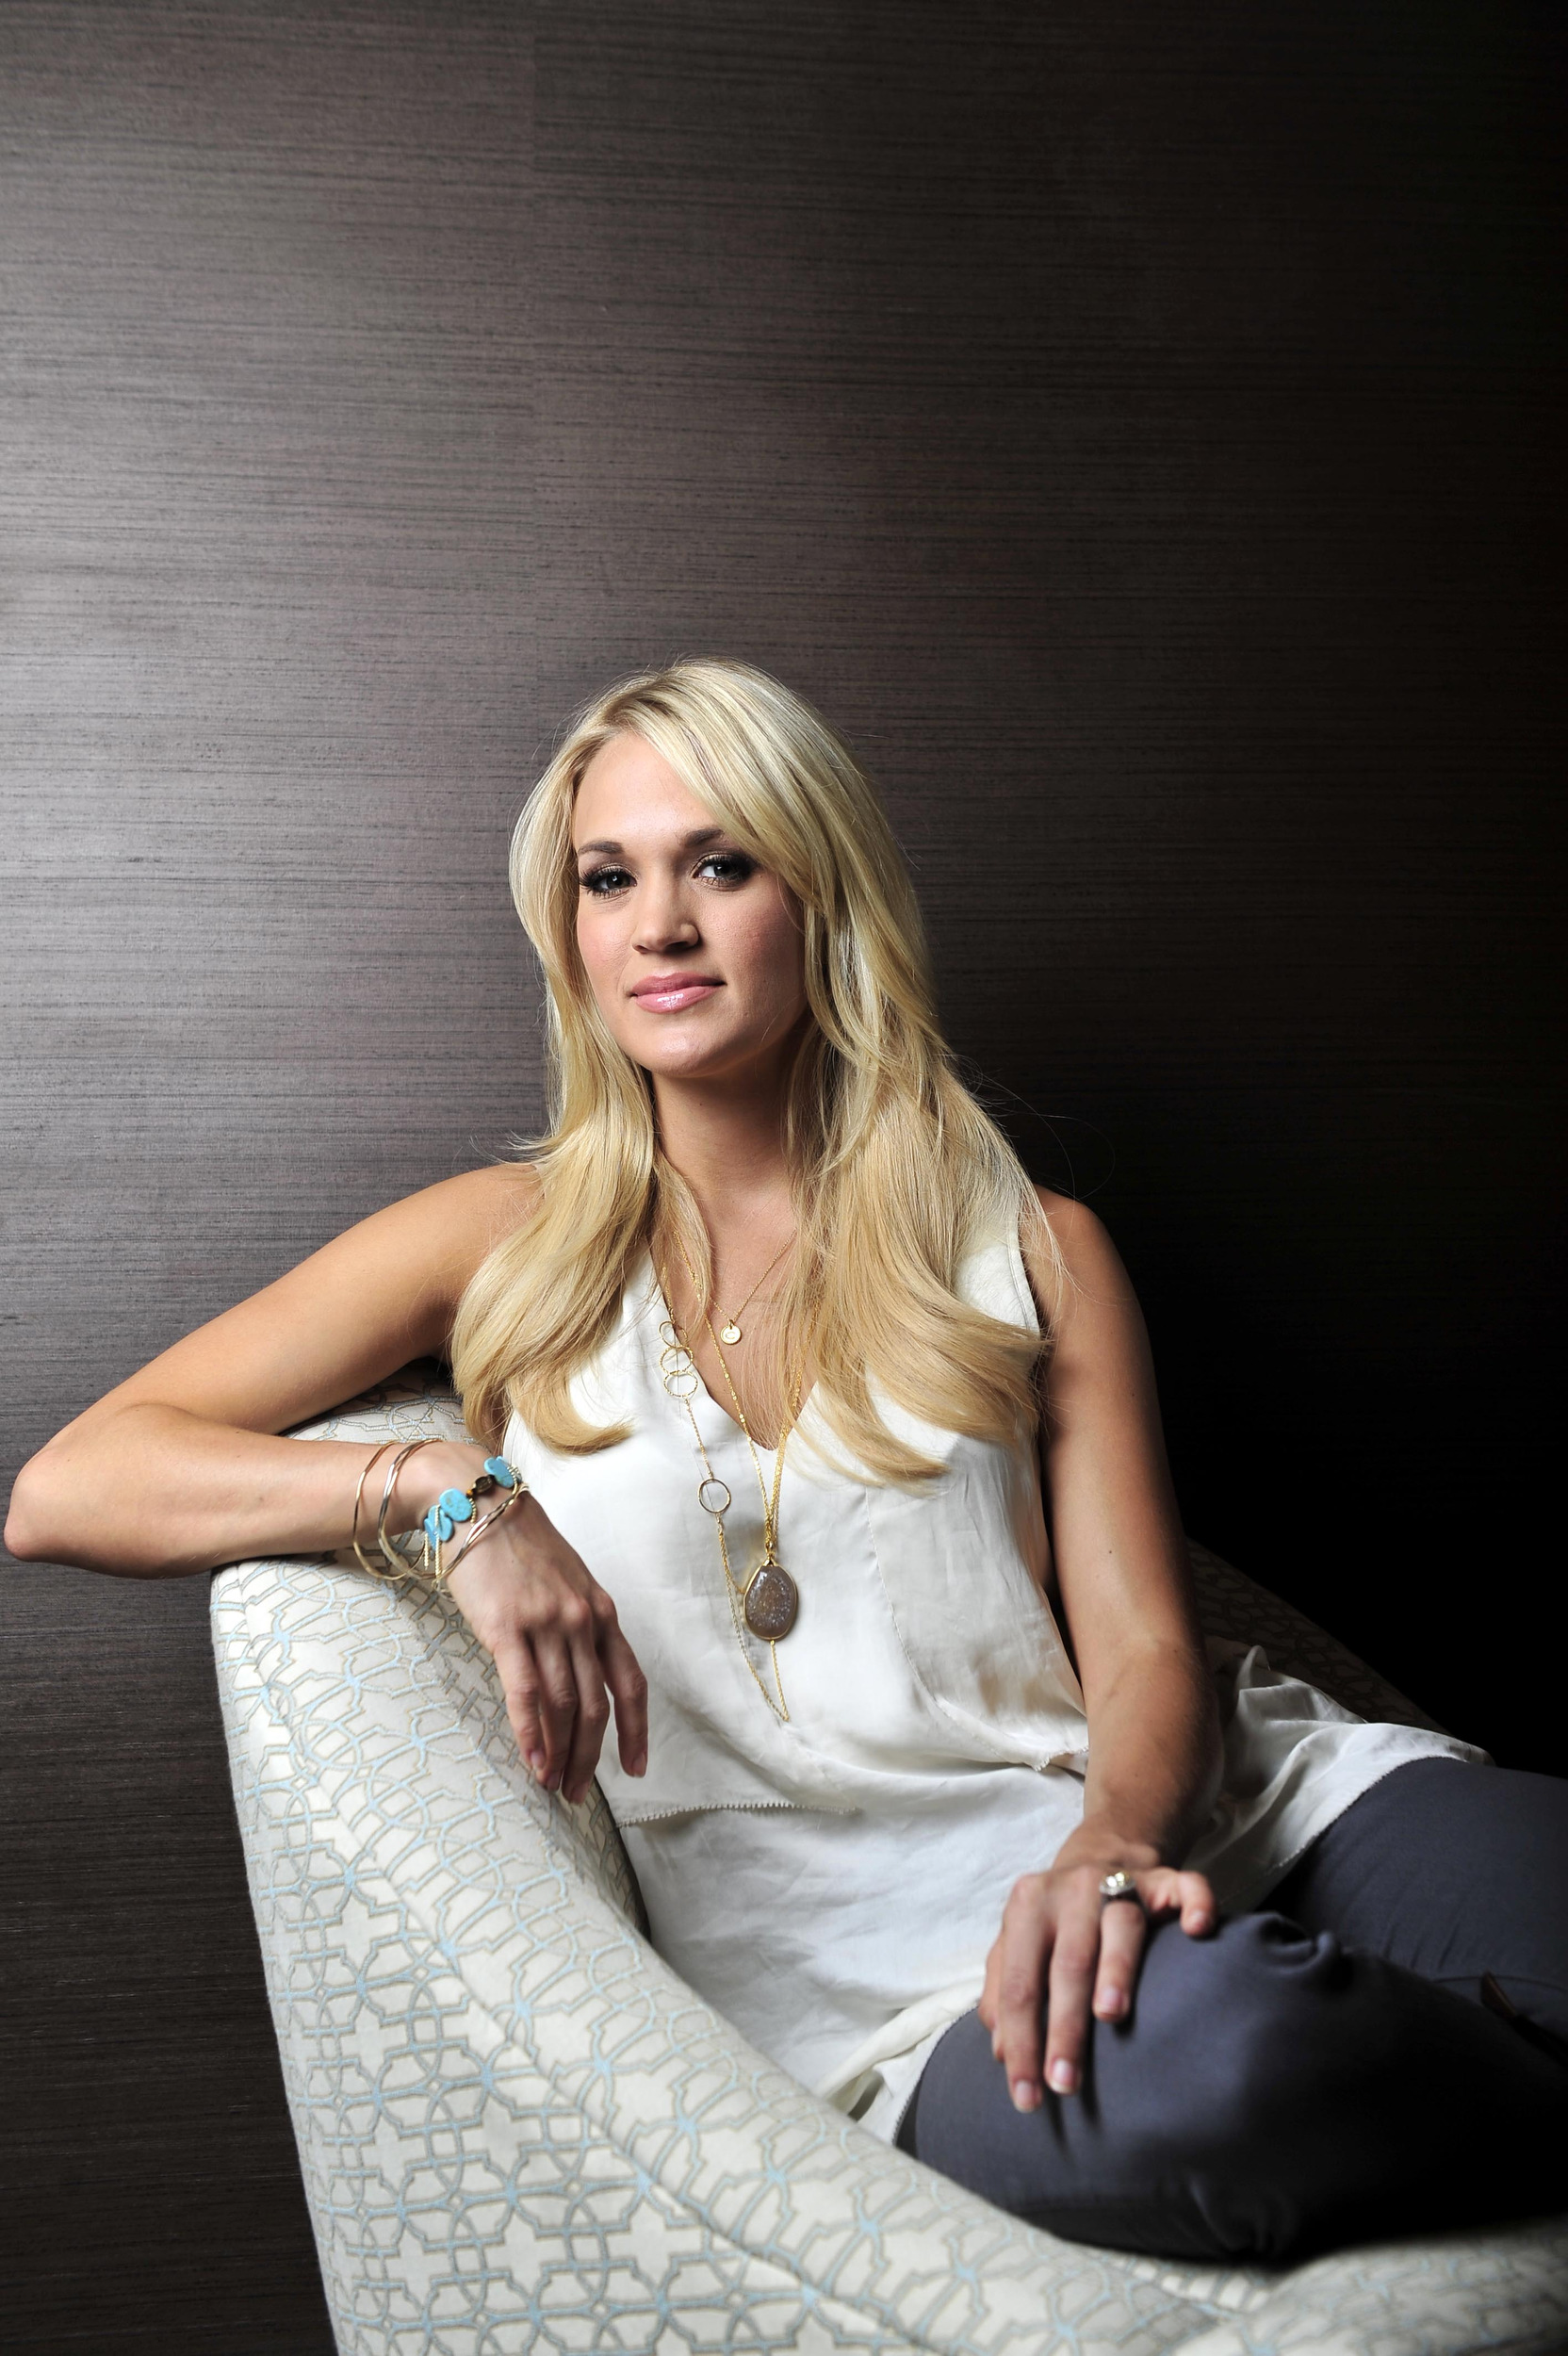  Carrie Underwood backstage at the Grand Ole Opry. 